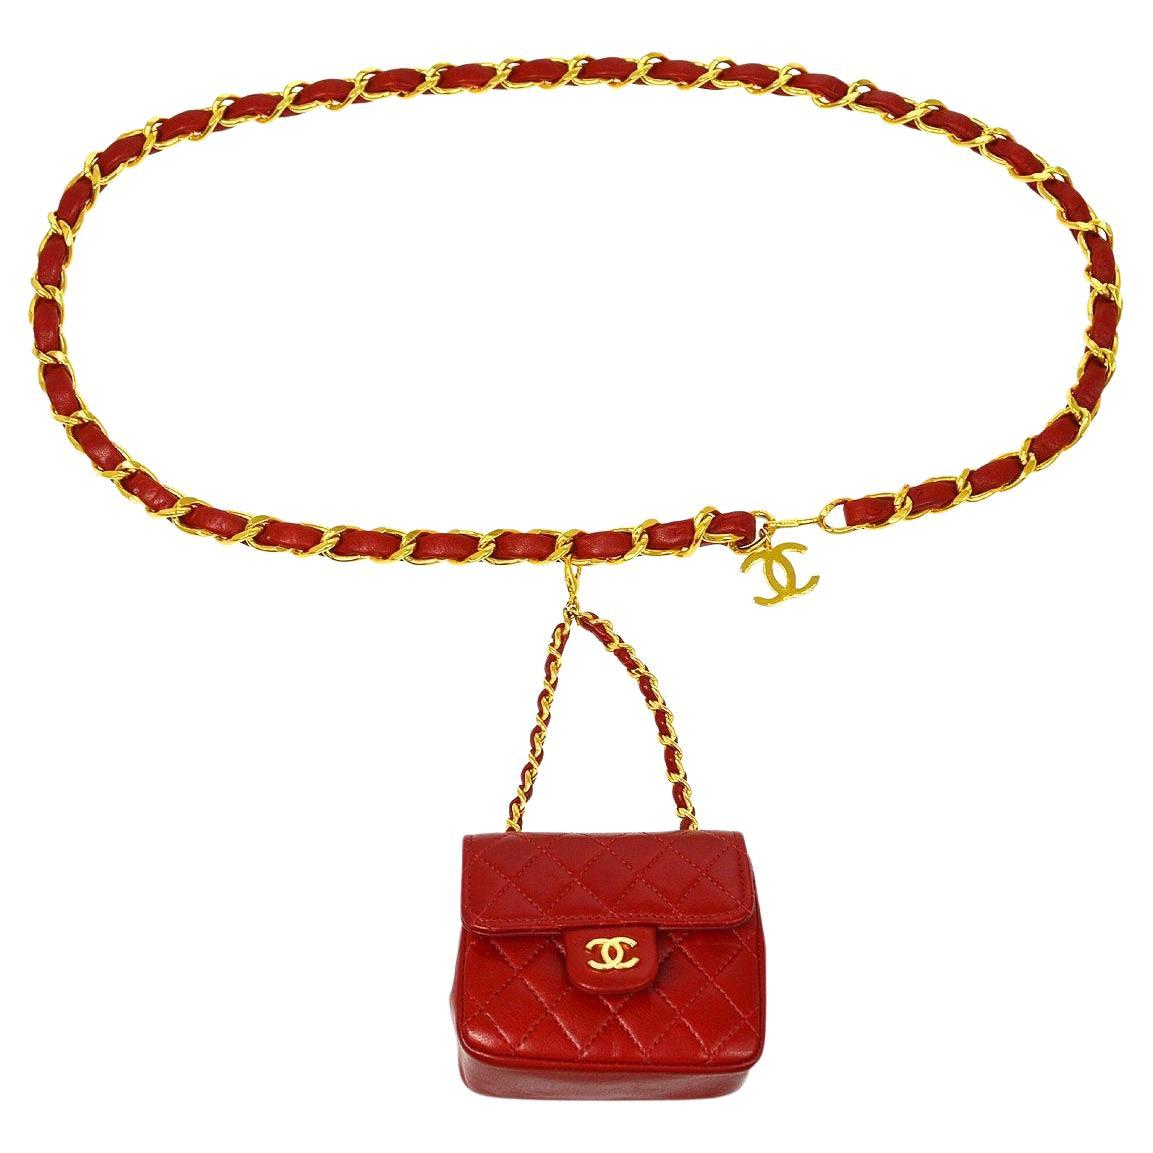 Chanel Red Lambskin Leather Gold Hardware Micro Mini Pochette Waist Belt Bag  For Sale At 1Stdibs | Chanel Red Belt Bag, Red Chanel Belt Bag, Chanel Belt  Bag Red